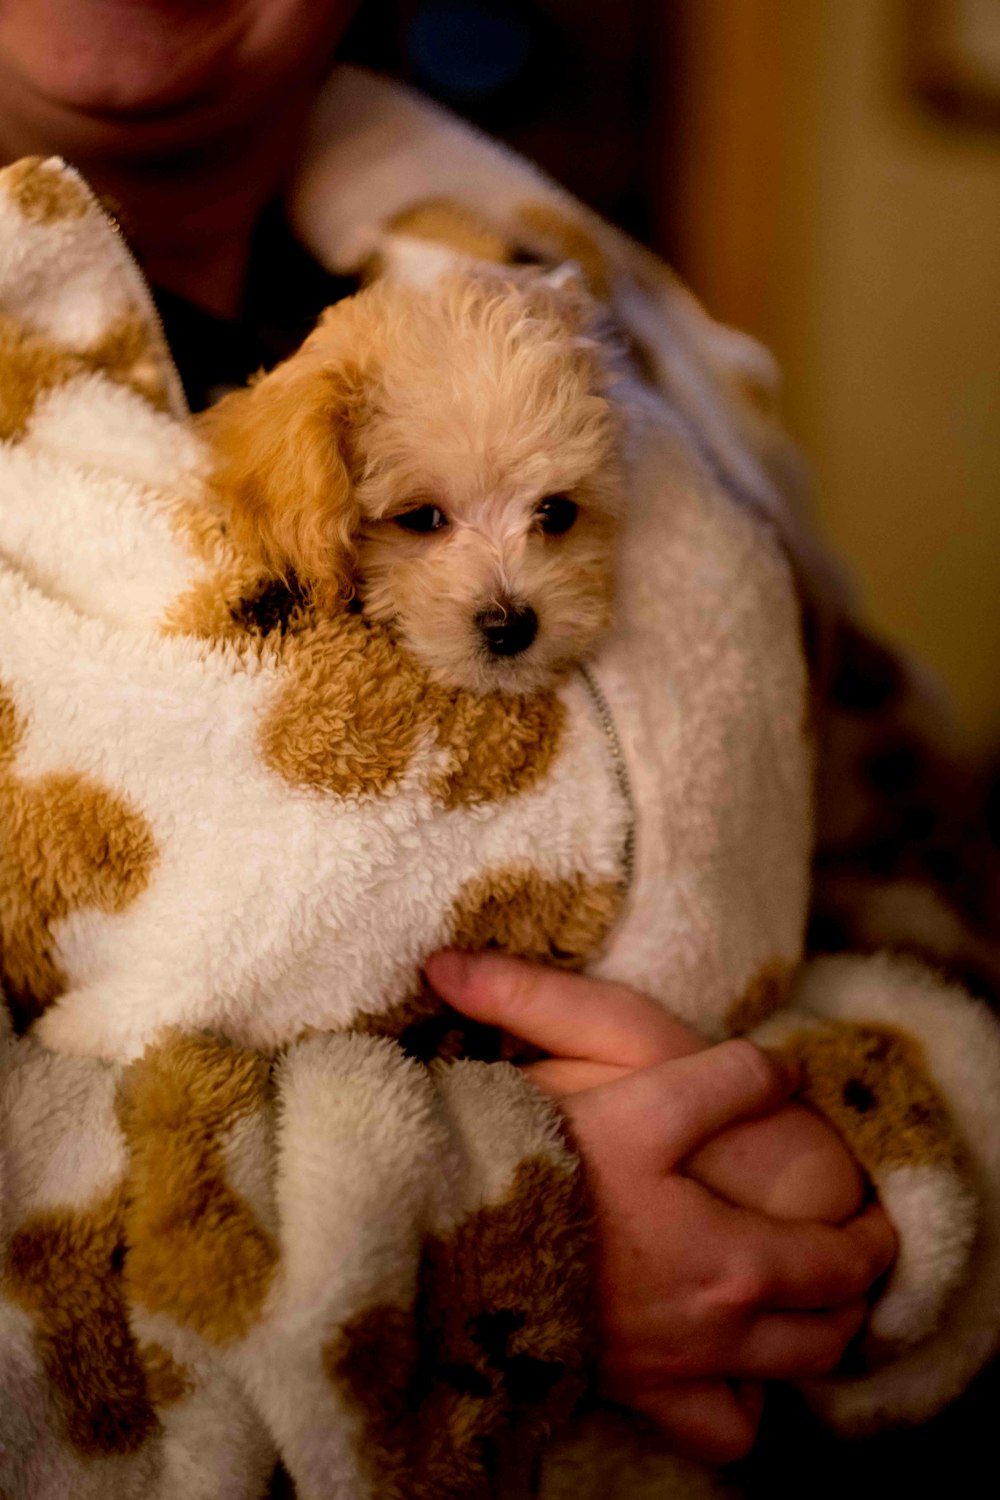 a person holding a small dog wrapped in a blanket